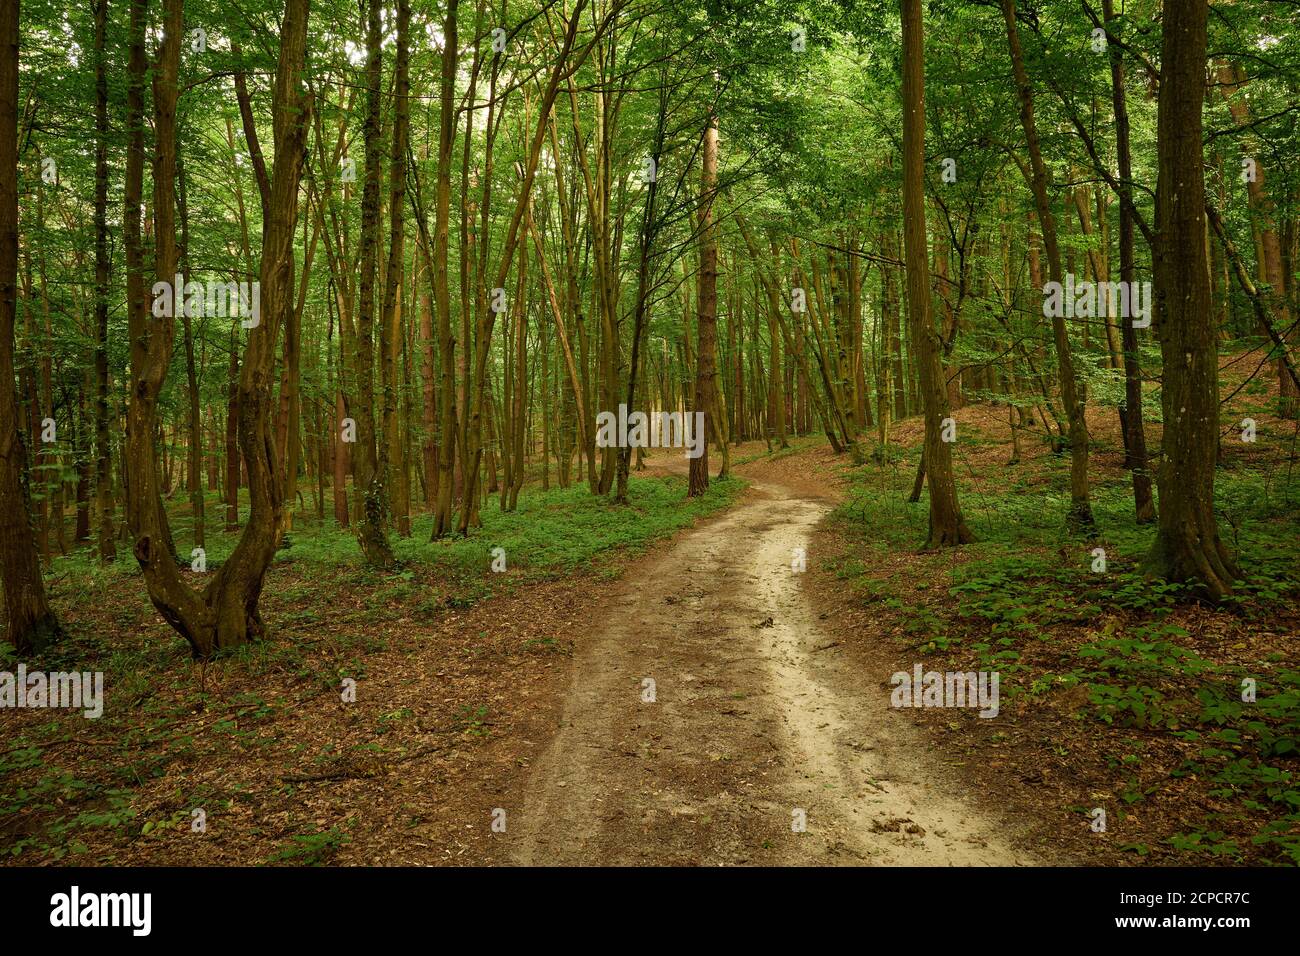 Imprints on the walk in the woods. Traces on the dirt road in the green forest. Green and brown backdrop. Calm woodland scene. Scenic forestscape Stock Photo